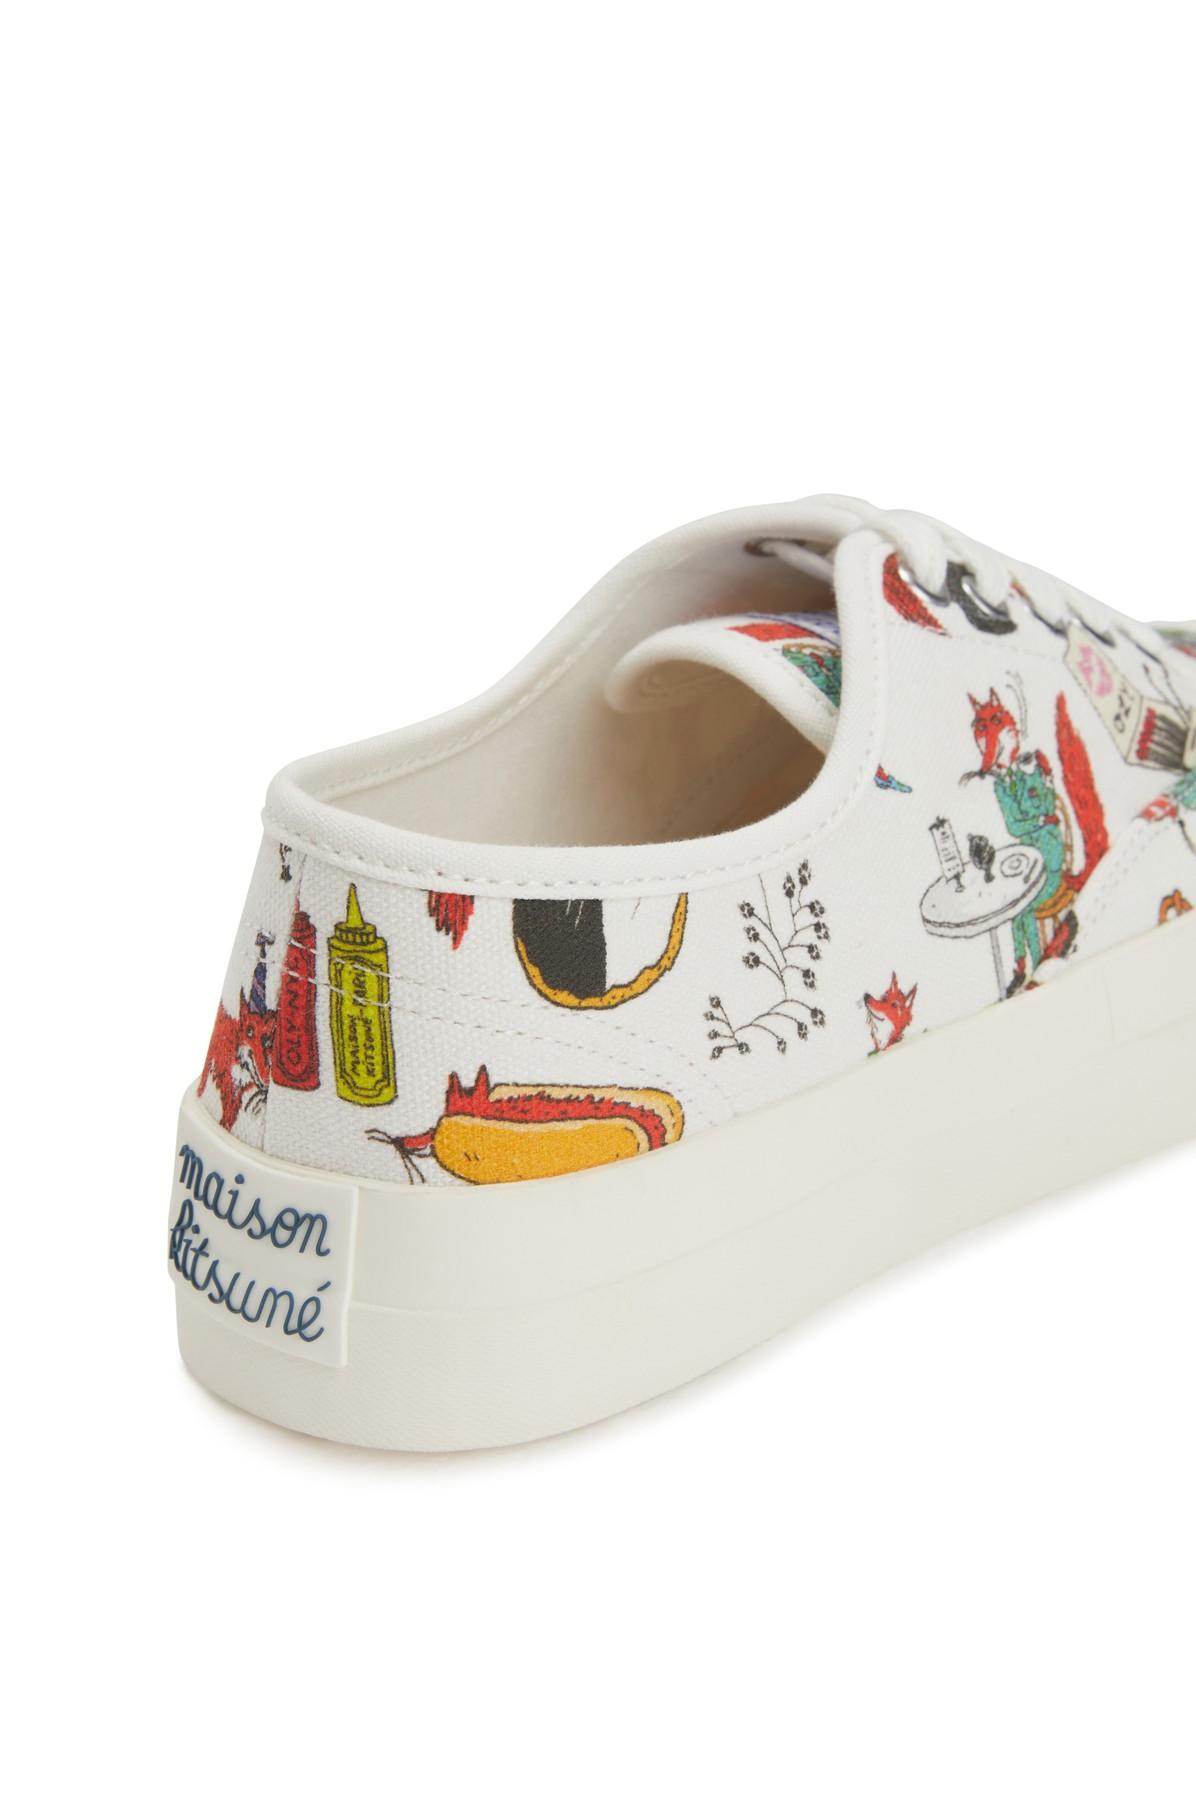 Maison Kitsuné Cotton Oly All-over Print Sneakers | Lyst